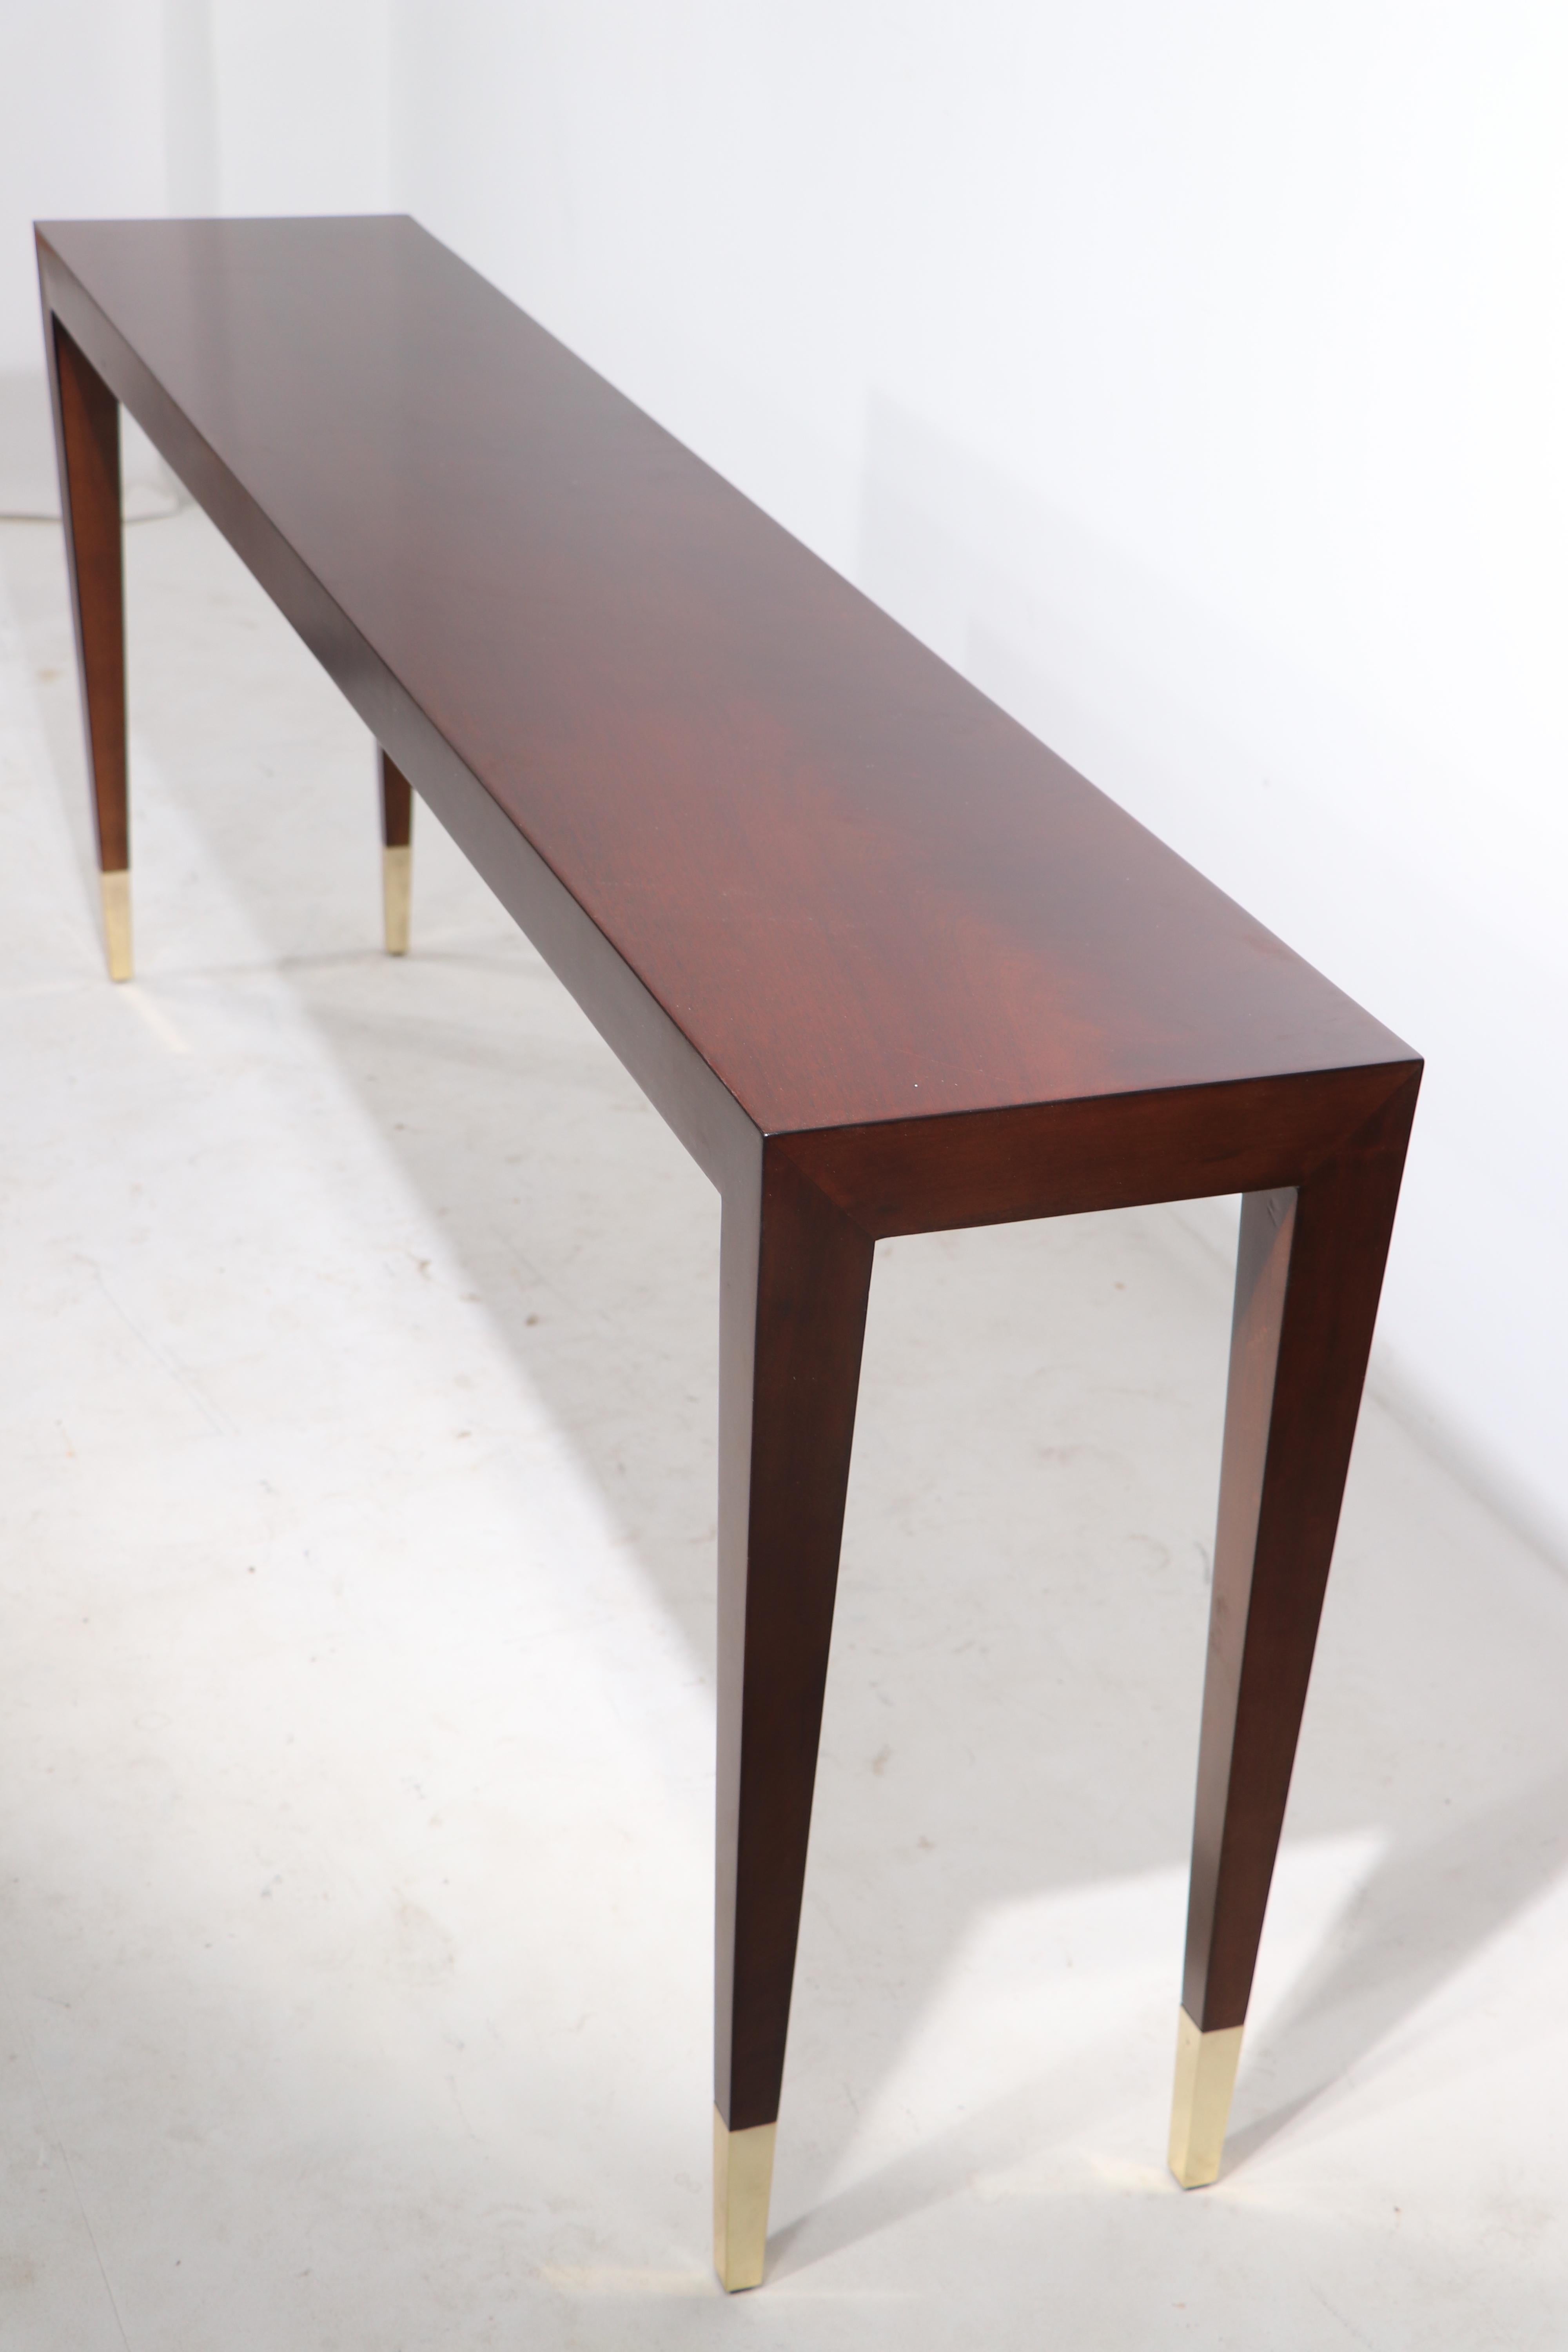 Contemporary Elegant Extra Long Console Table in the French Art Deco Style Marked Uovo